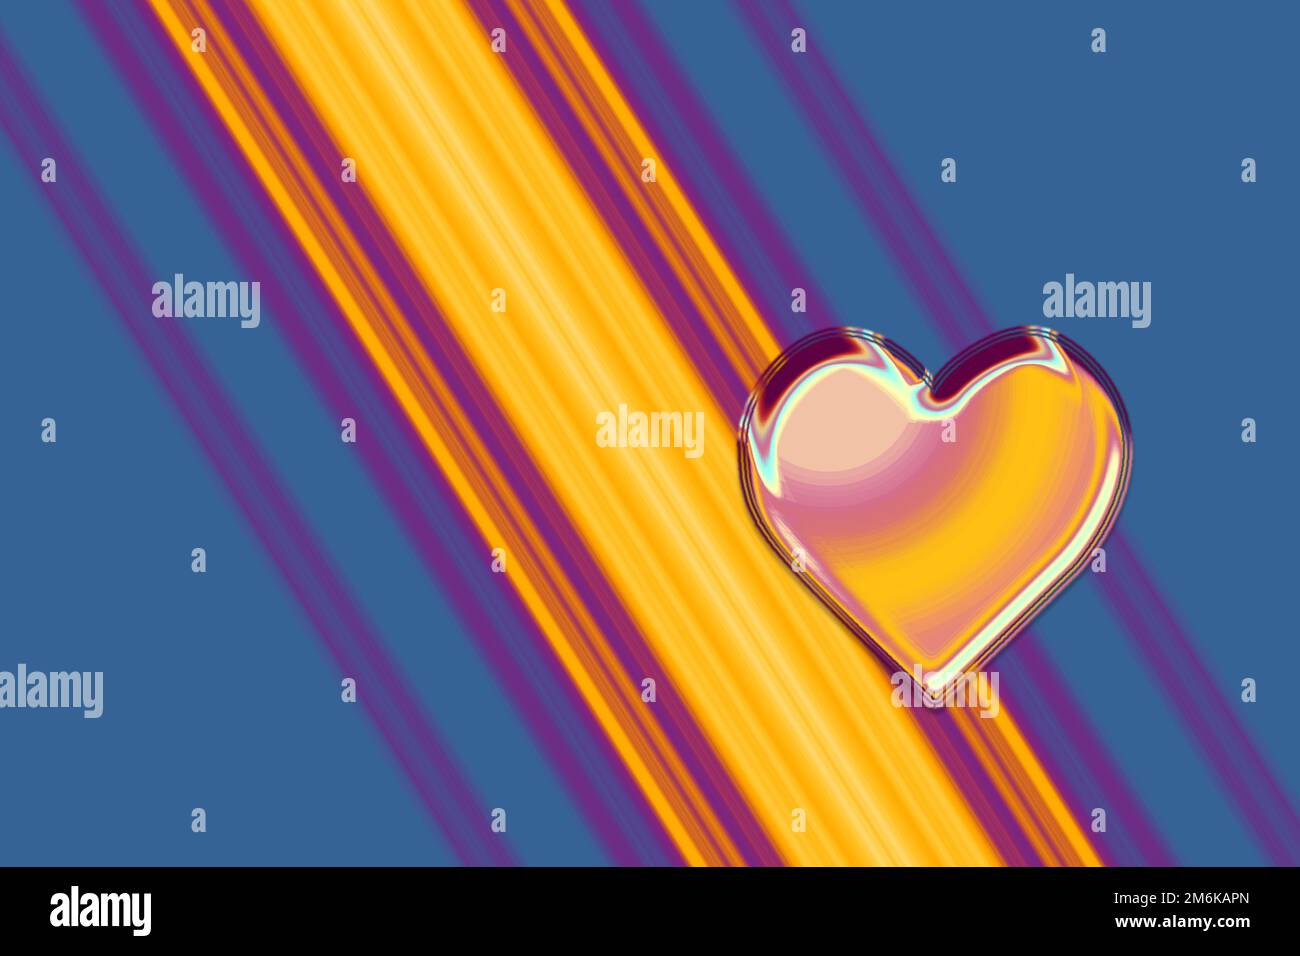 Heart shape as symbol of love and care. Happy Valentines Day heart greeting Stock Photo